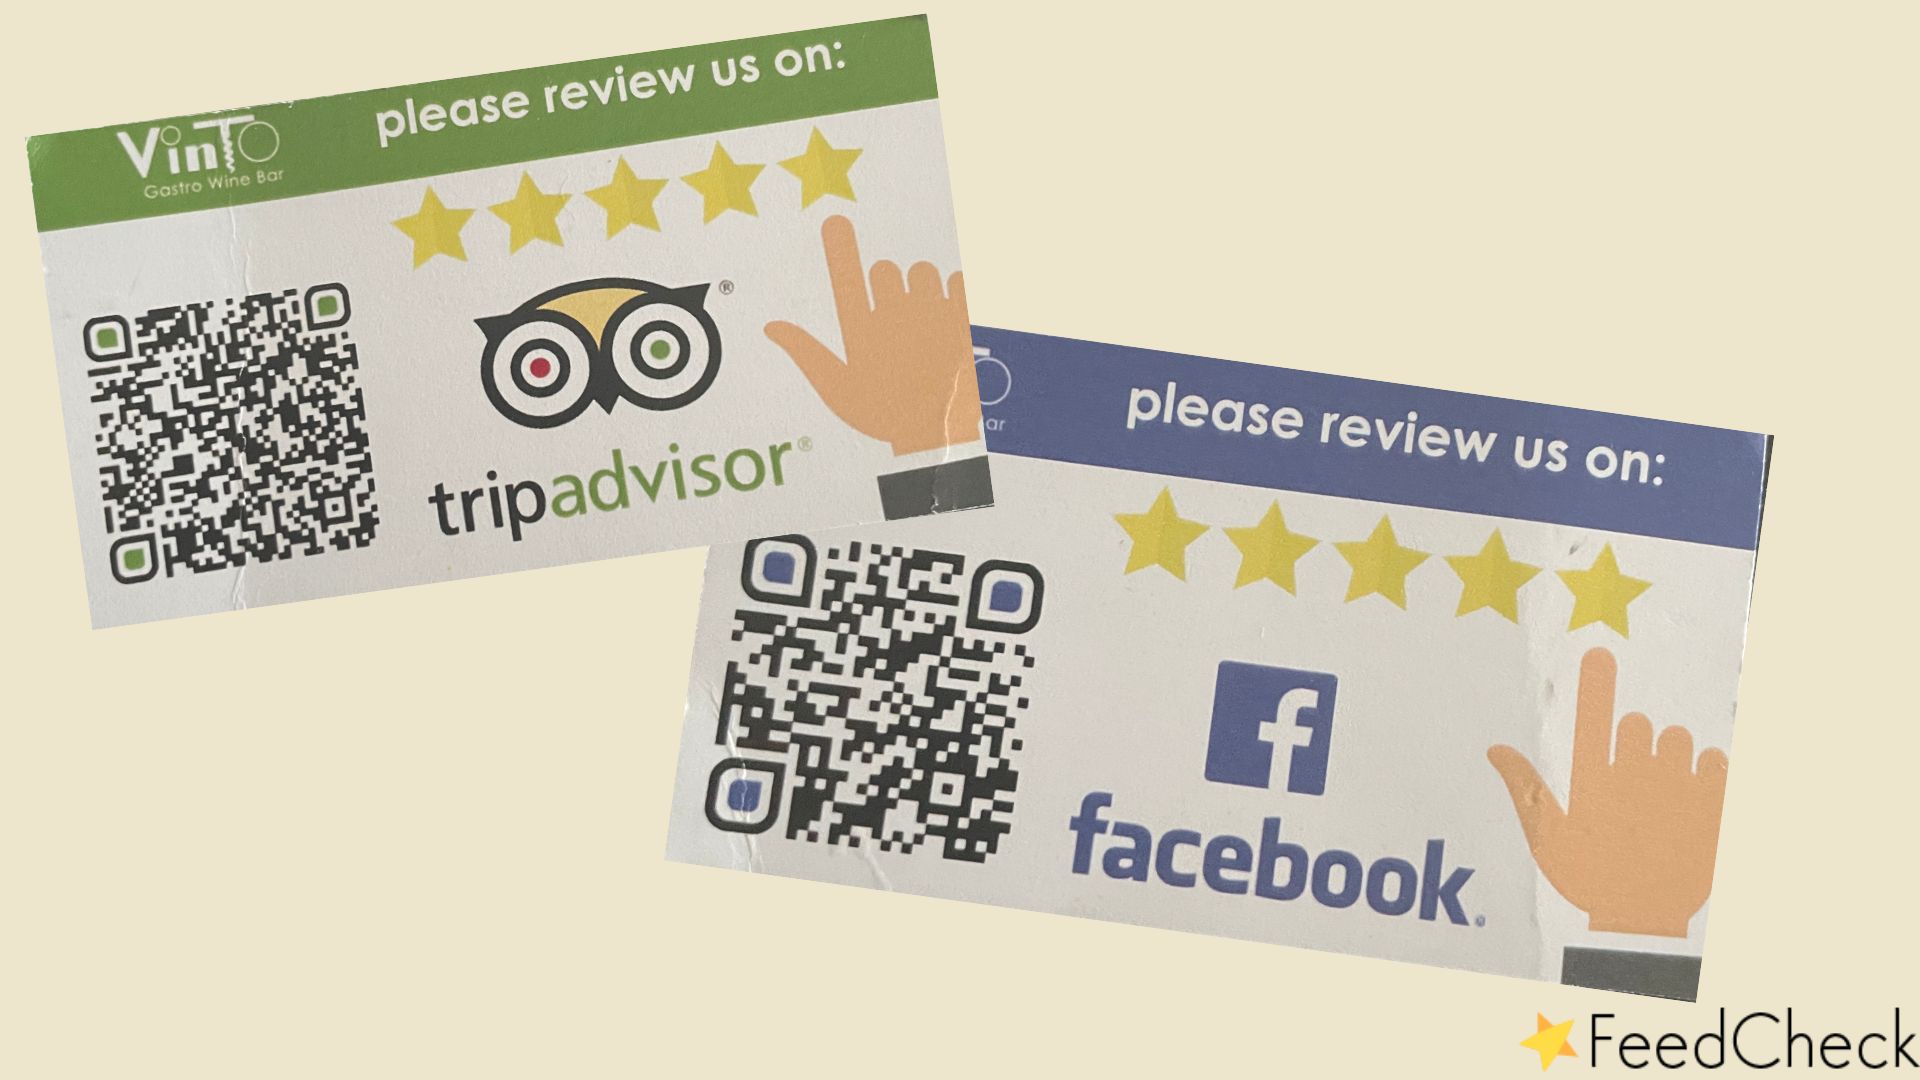 How to encourage your customers to leave a review with offline marketing
